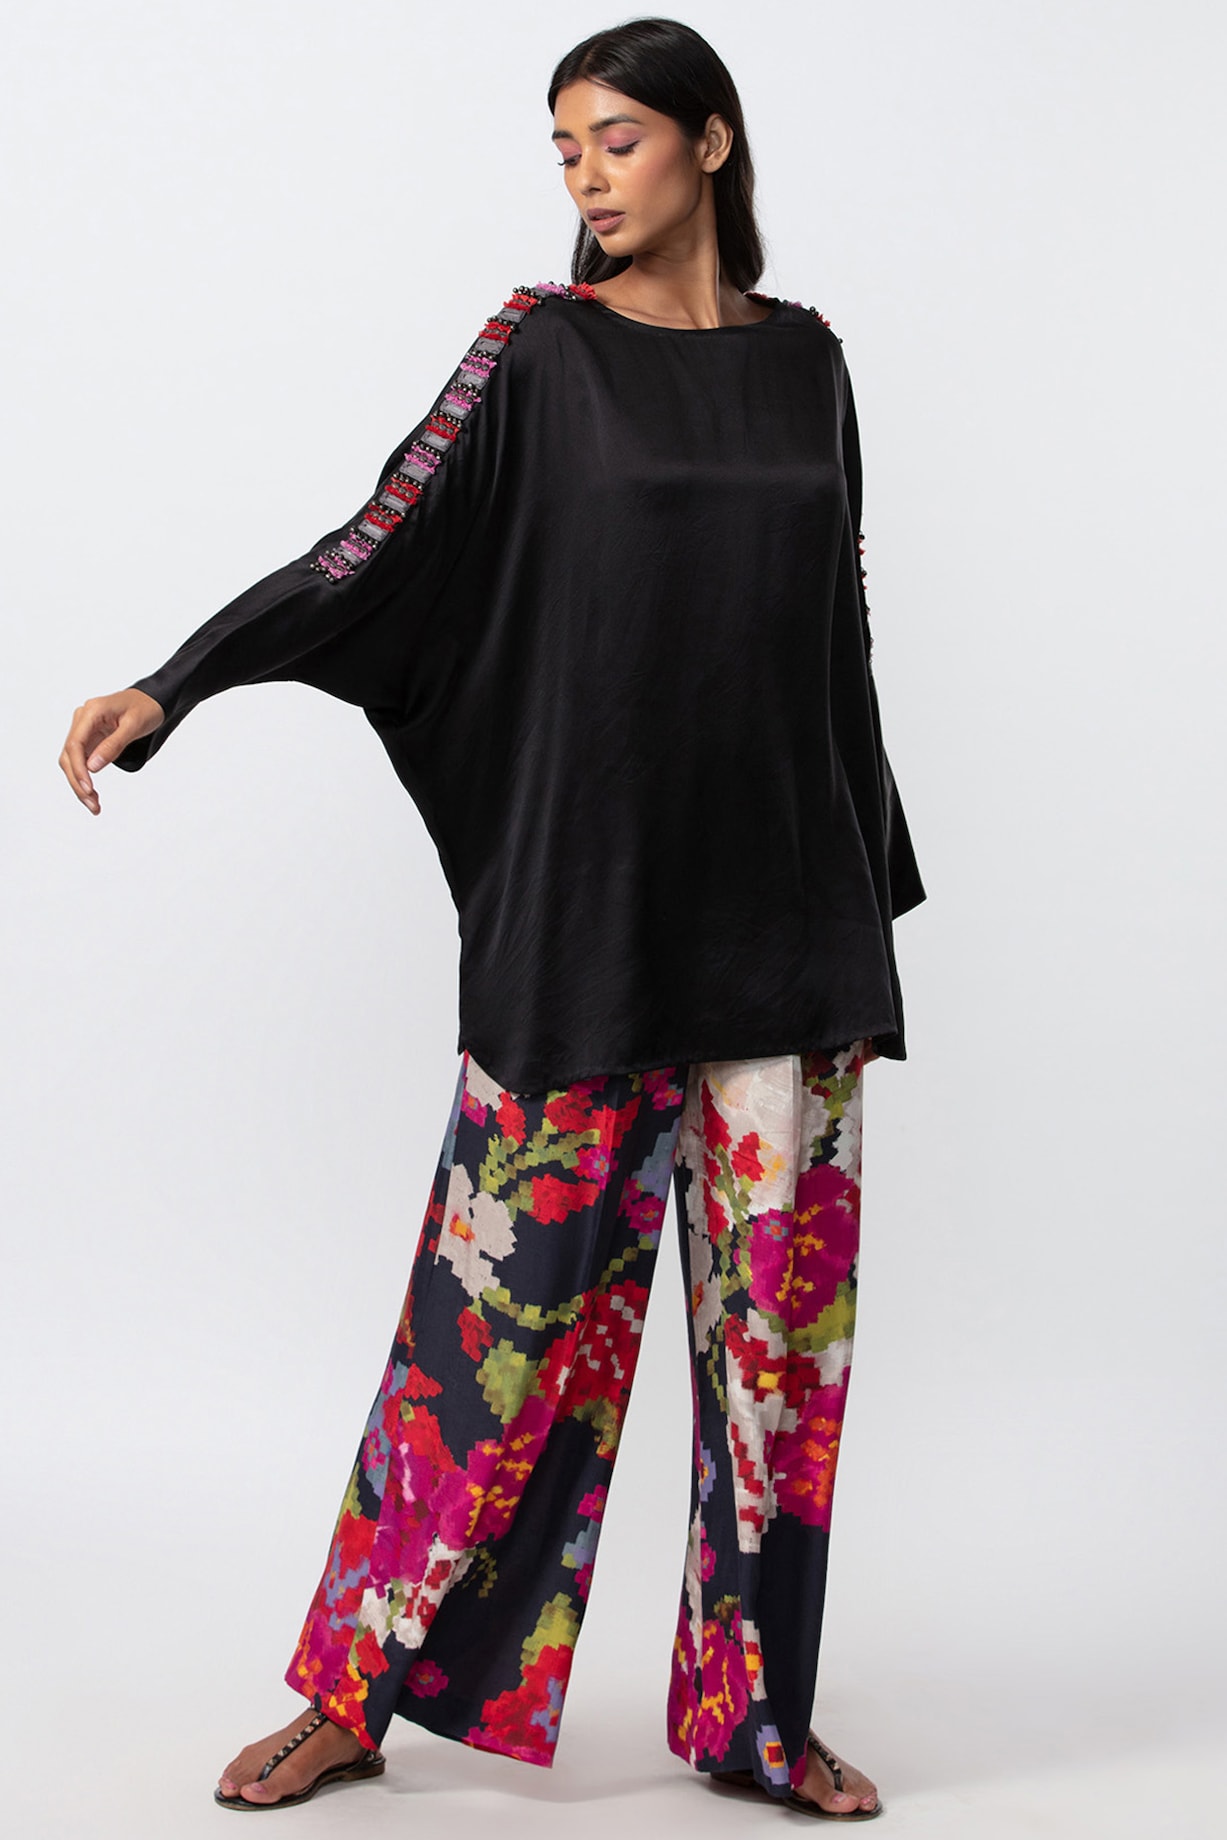 Printed Palazzo Pants by SWAK Designs • THE PLUS-SIZE BACKPACKER